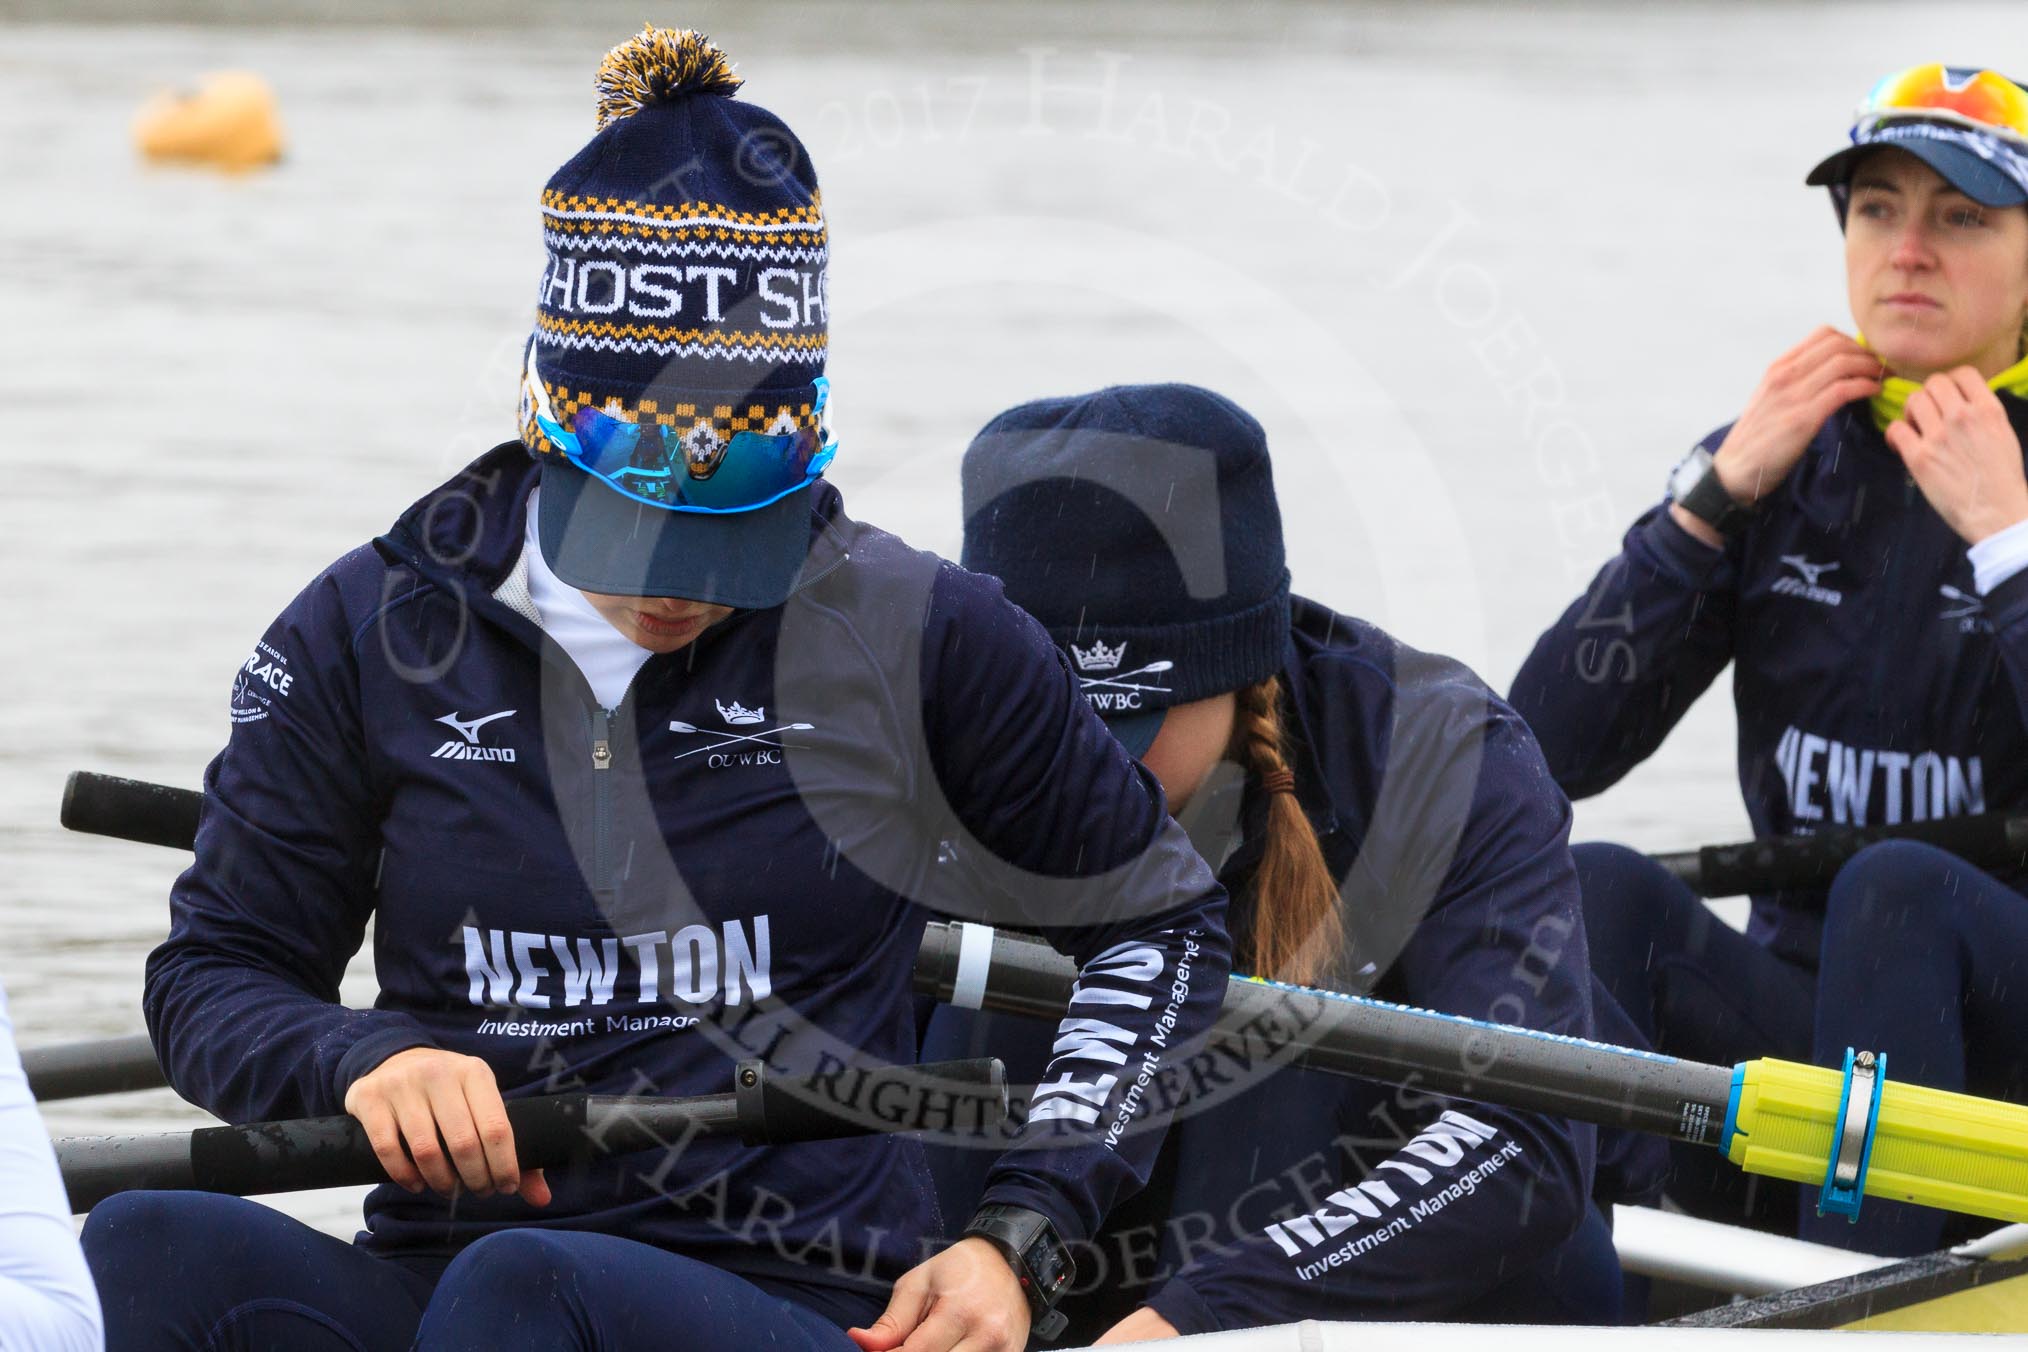 The Women's Boat Race season 2018 - fixture OUWBC vs. Molesey BC: OUWBC getting the boat ready on a cold and rainy day, here 4 seat "Ghost Ship" Alice Roberts, 3 Juliette Perry, 2 Katherine Erickson.
River Thames between Putney Bridge and Mortlake,
London SW15,

United Kingdom,
on 04 March 2018 at 13:05, image #5